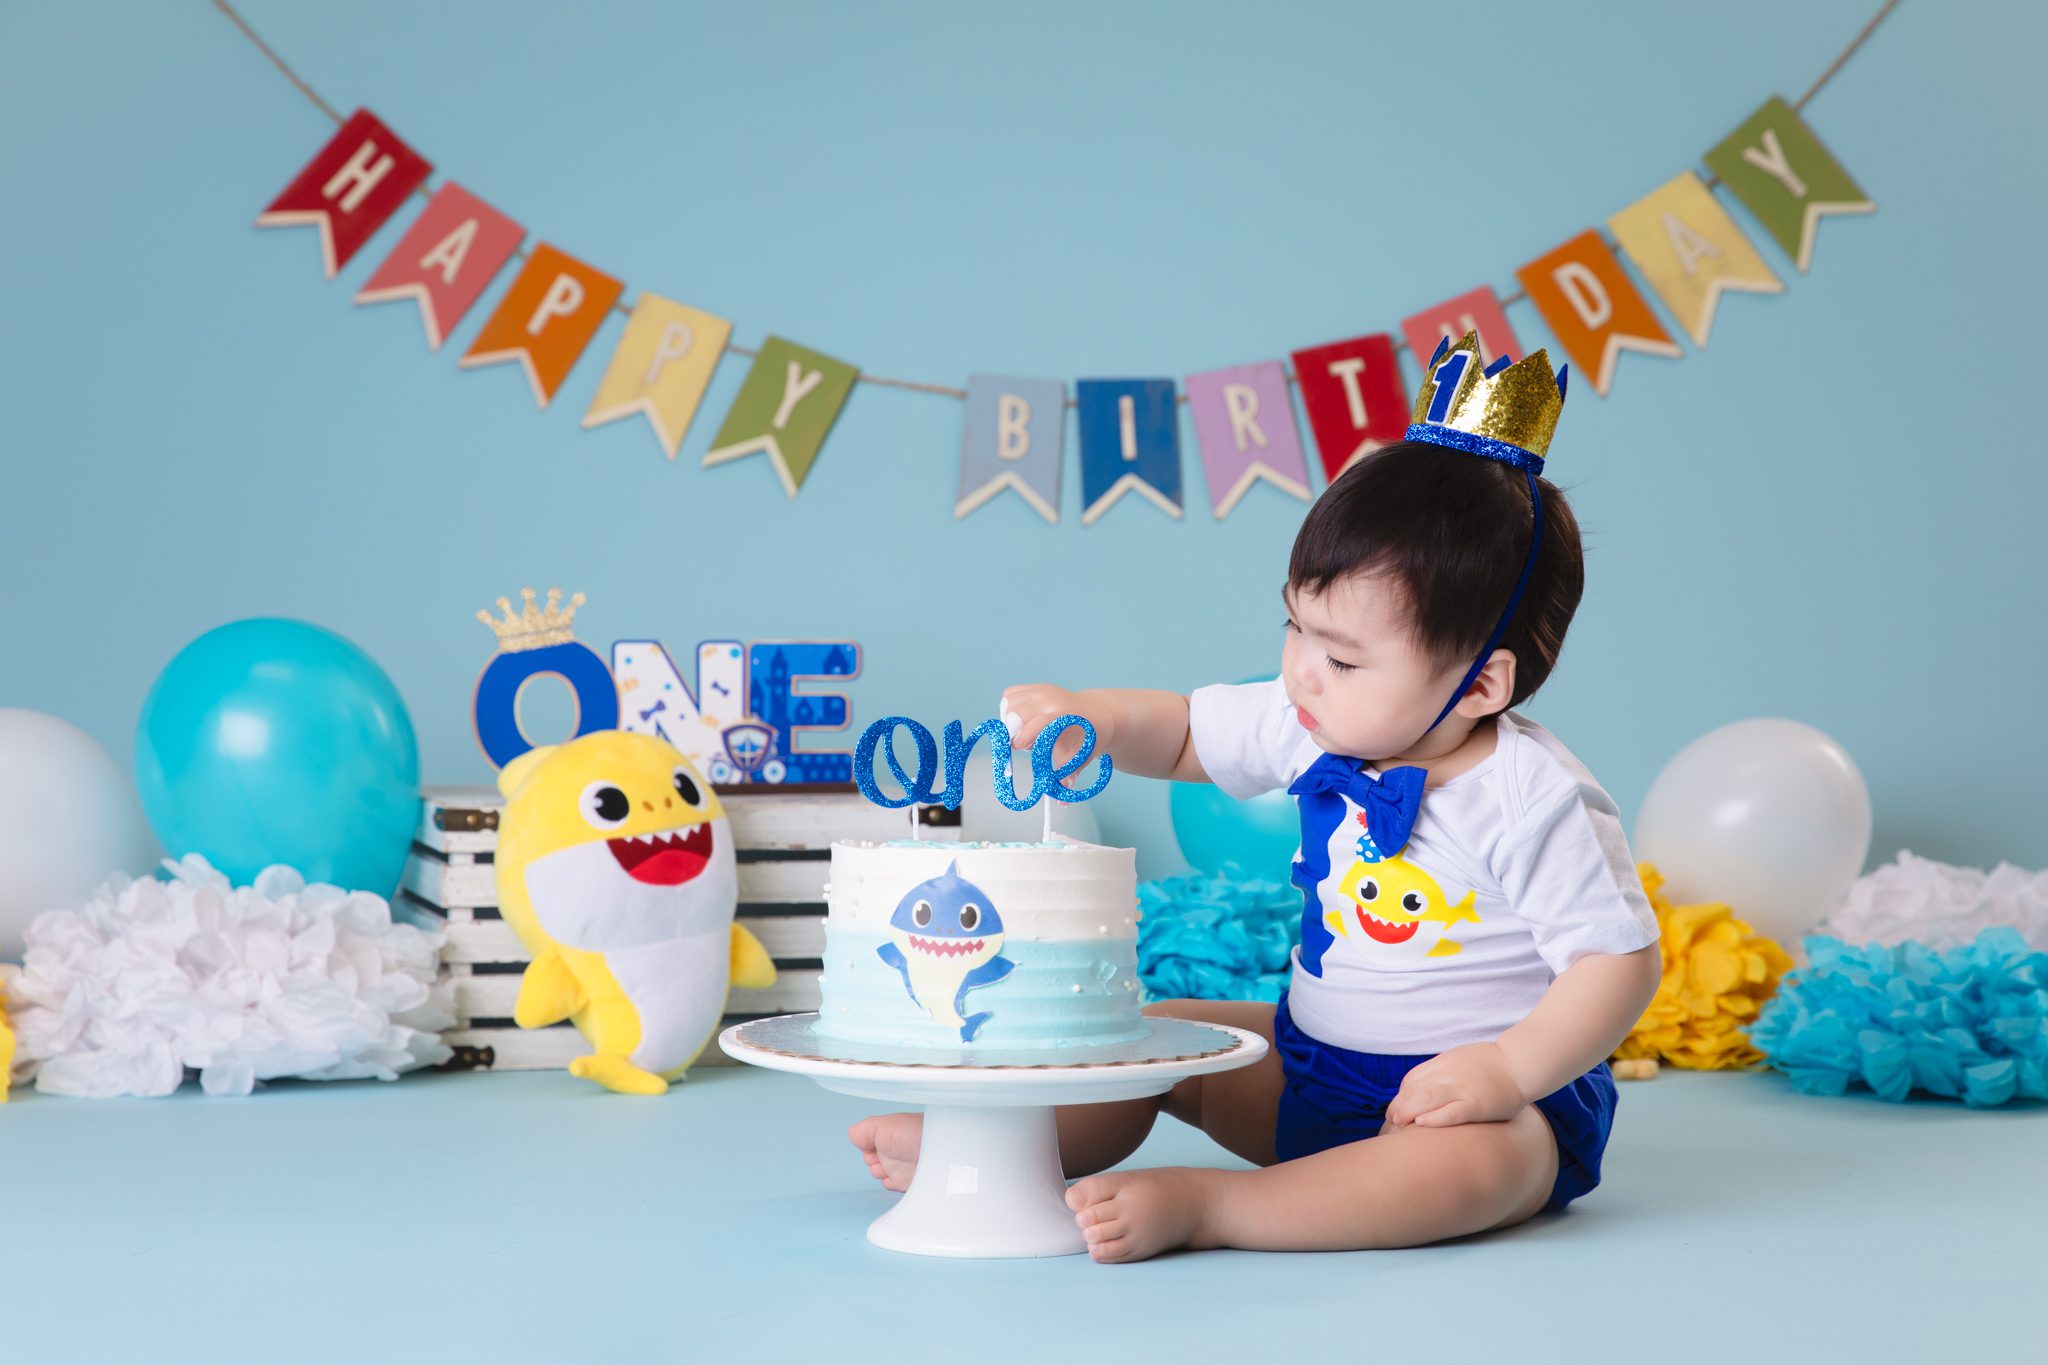 blue themed cake smash session for a baby boy